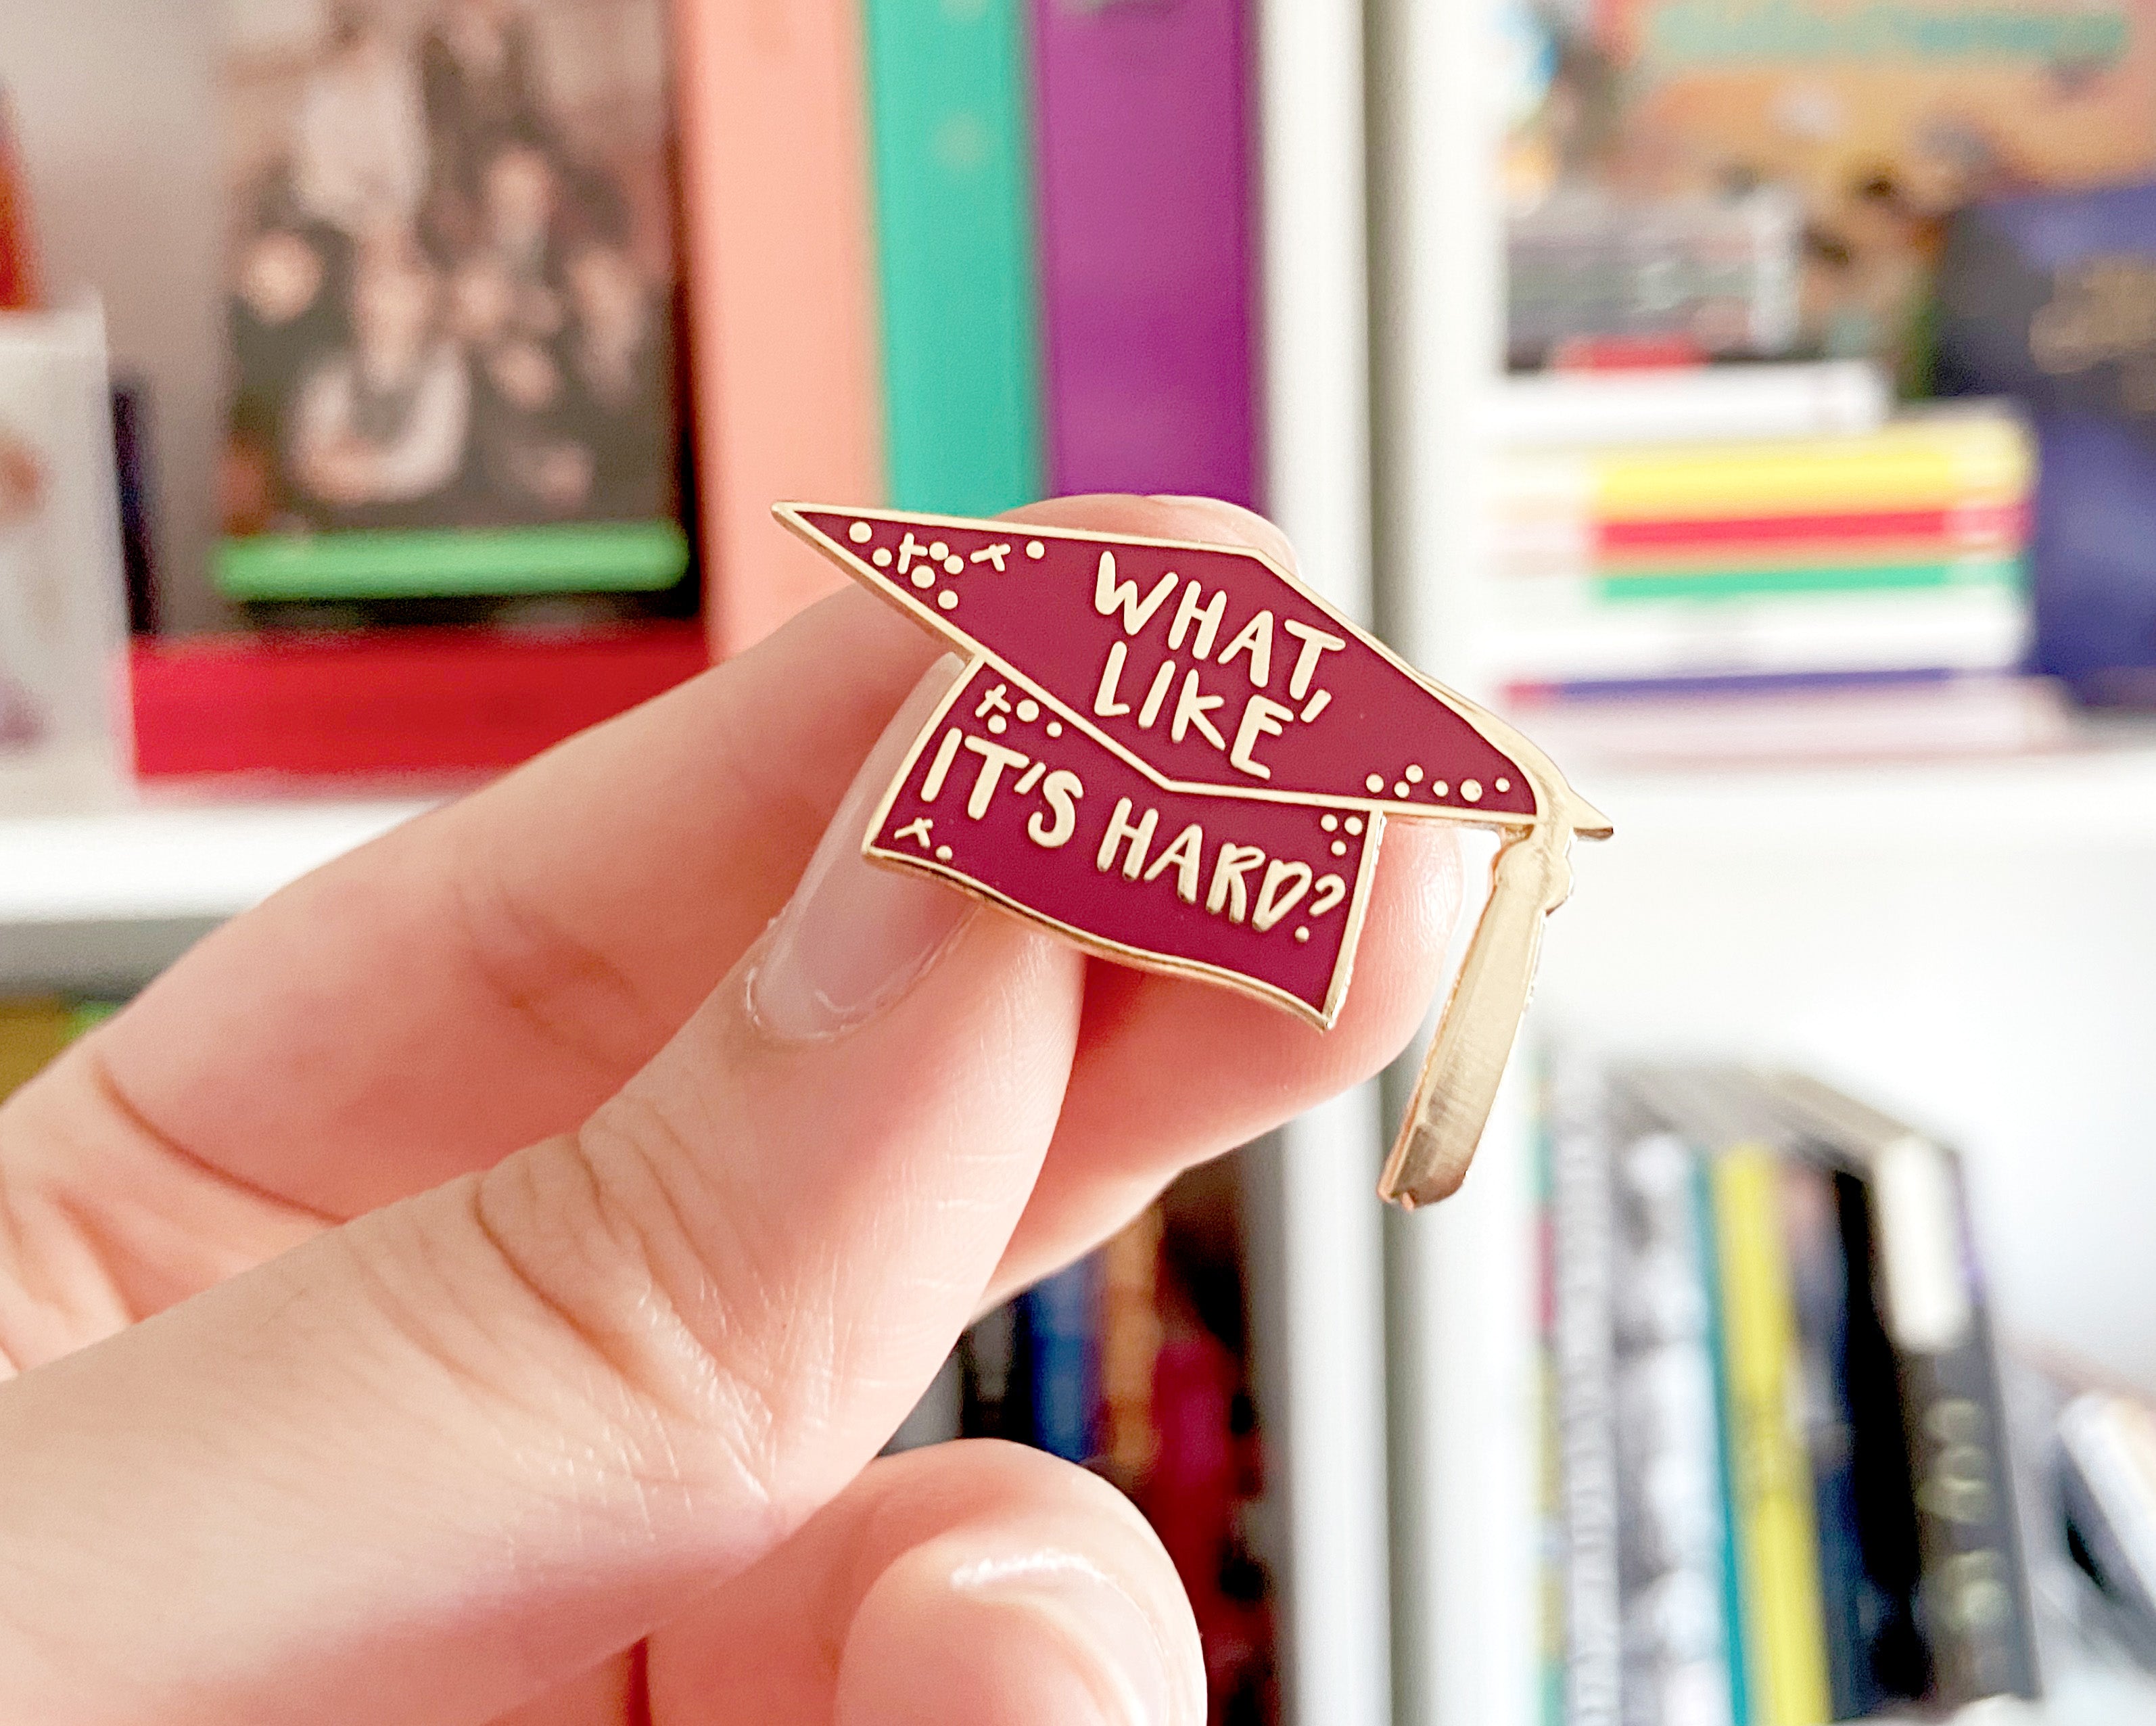 What, like it's hard? - Legally Blonde Inspired - Movie / Musical Enamel Pin